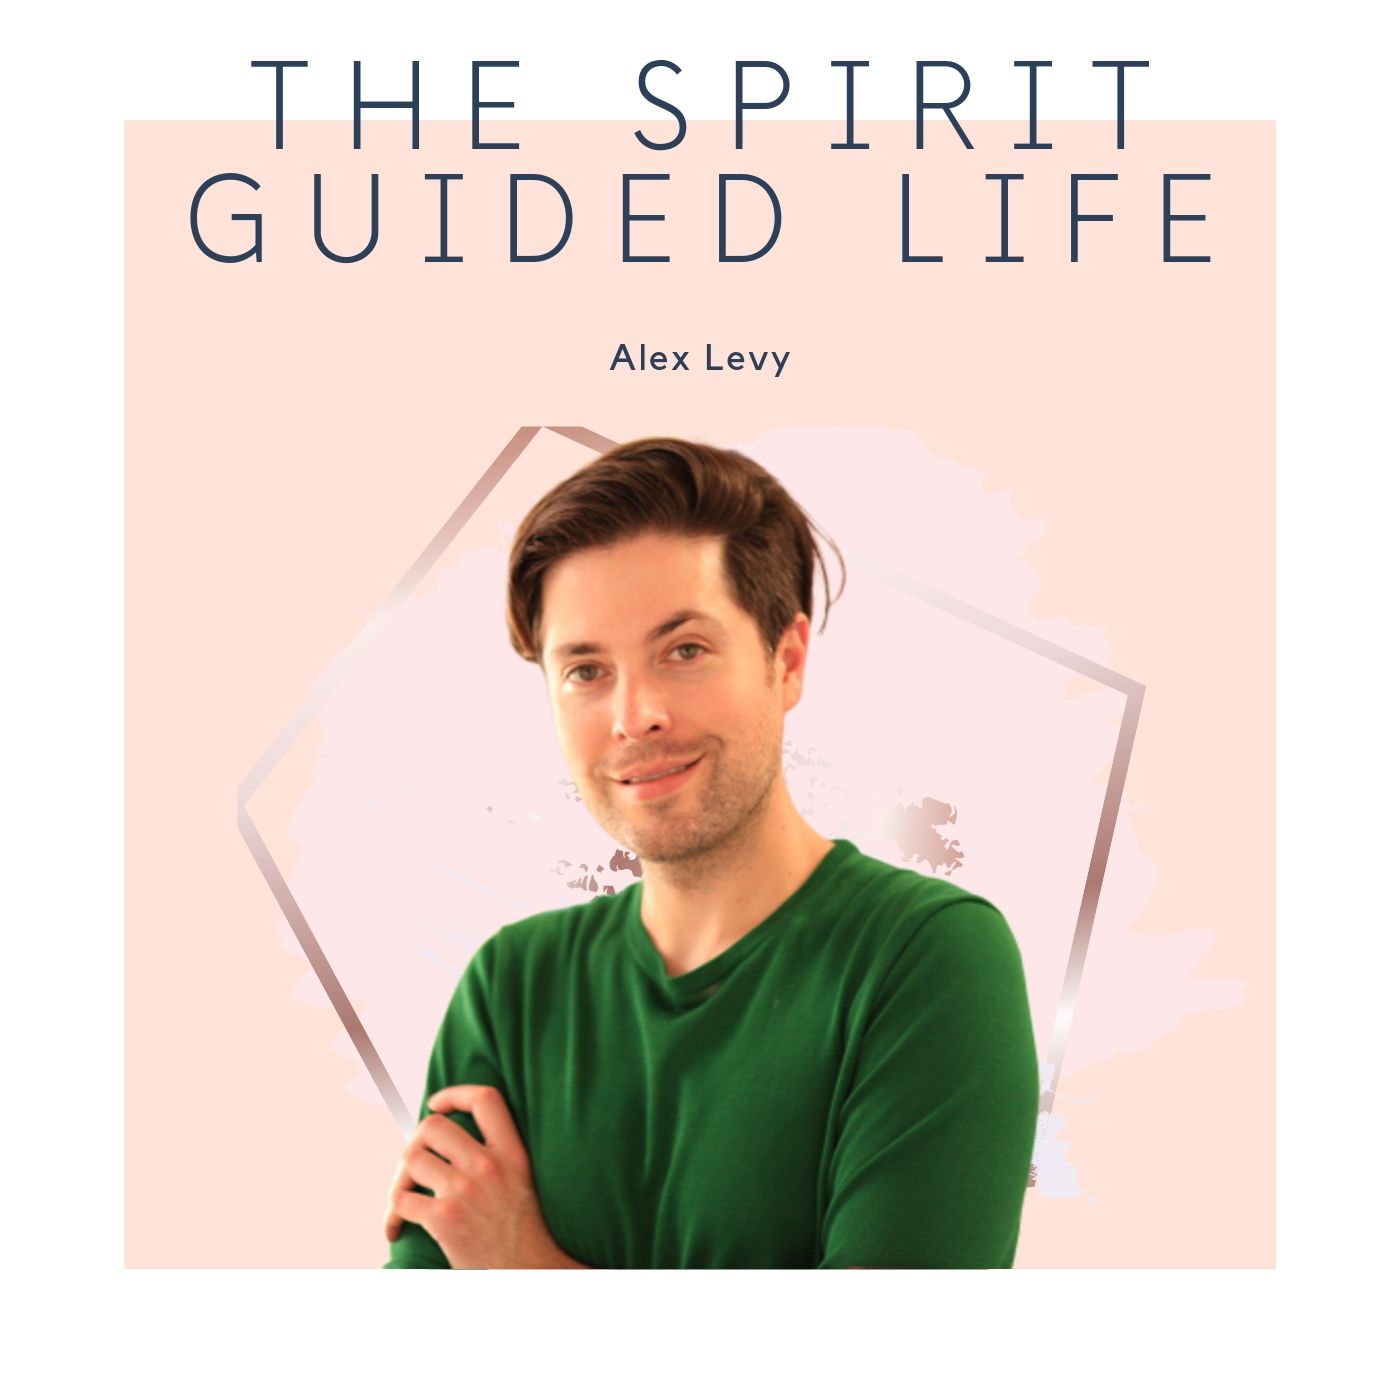 The Spirit Guided Life